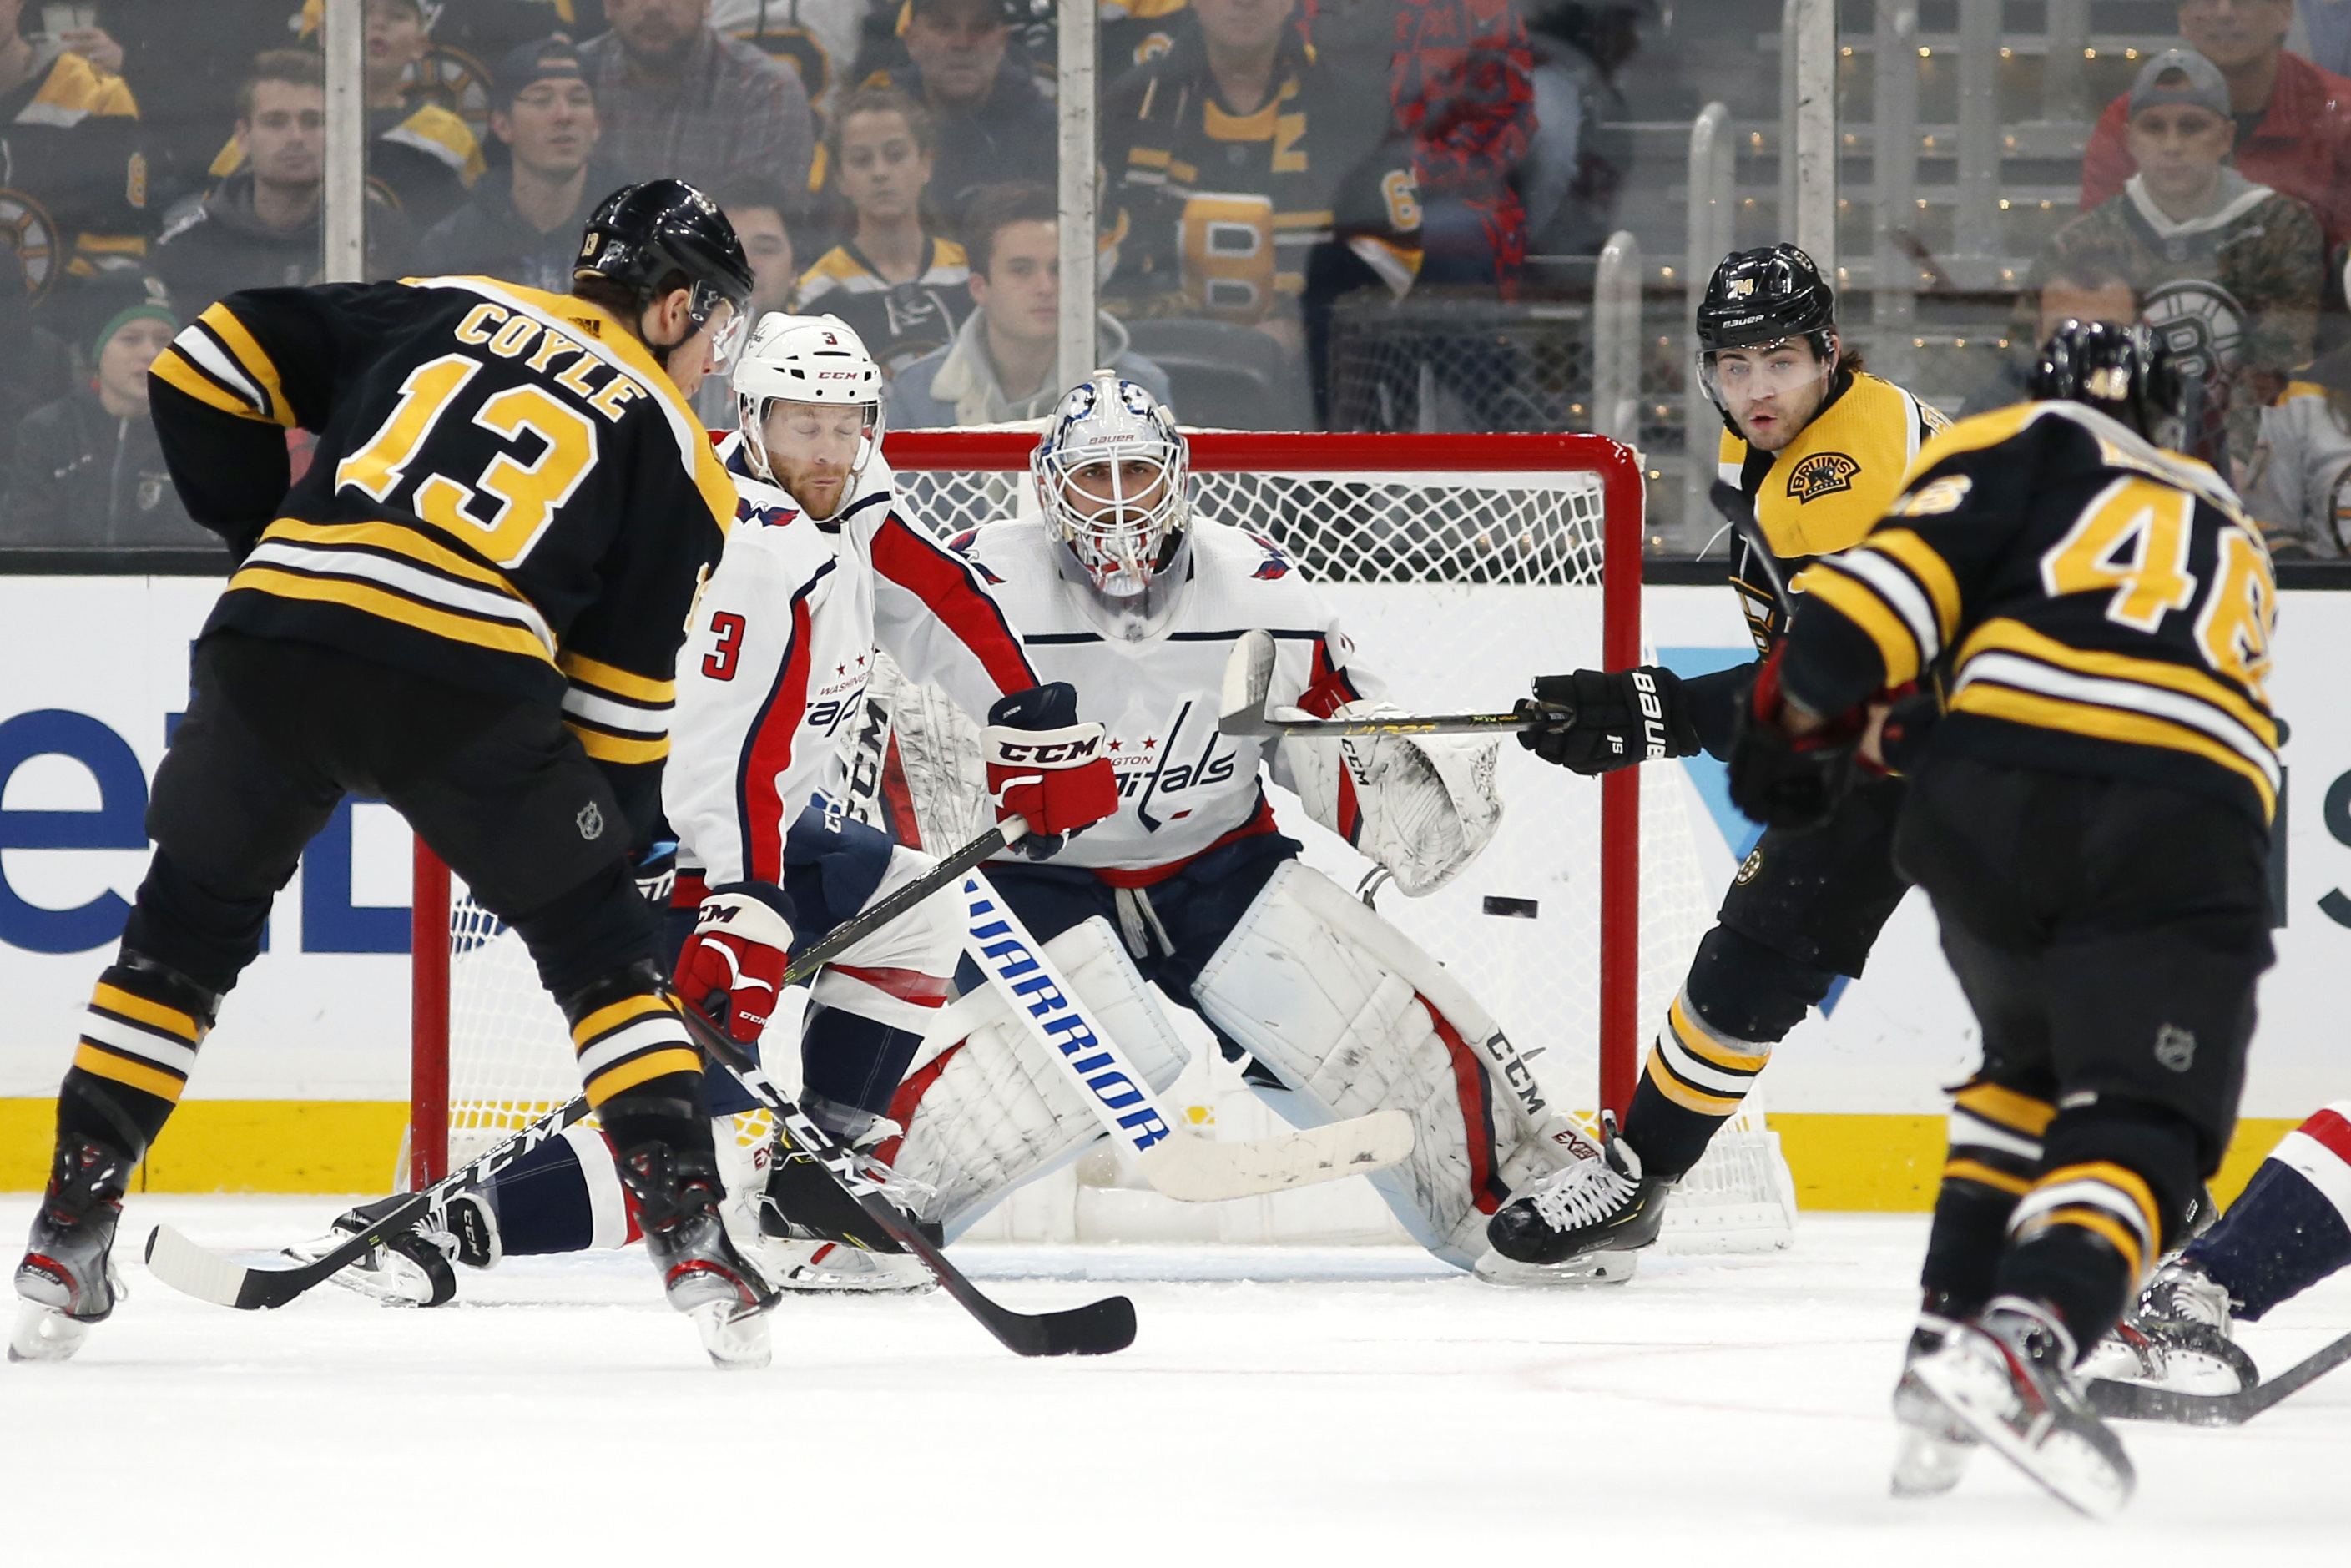 Bruins ride 4-goal 1st period to 7-3 rout of Capitals